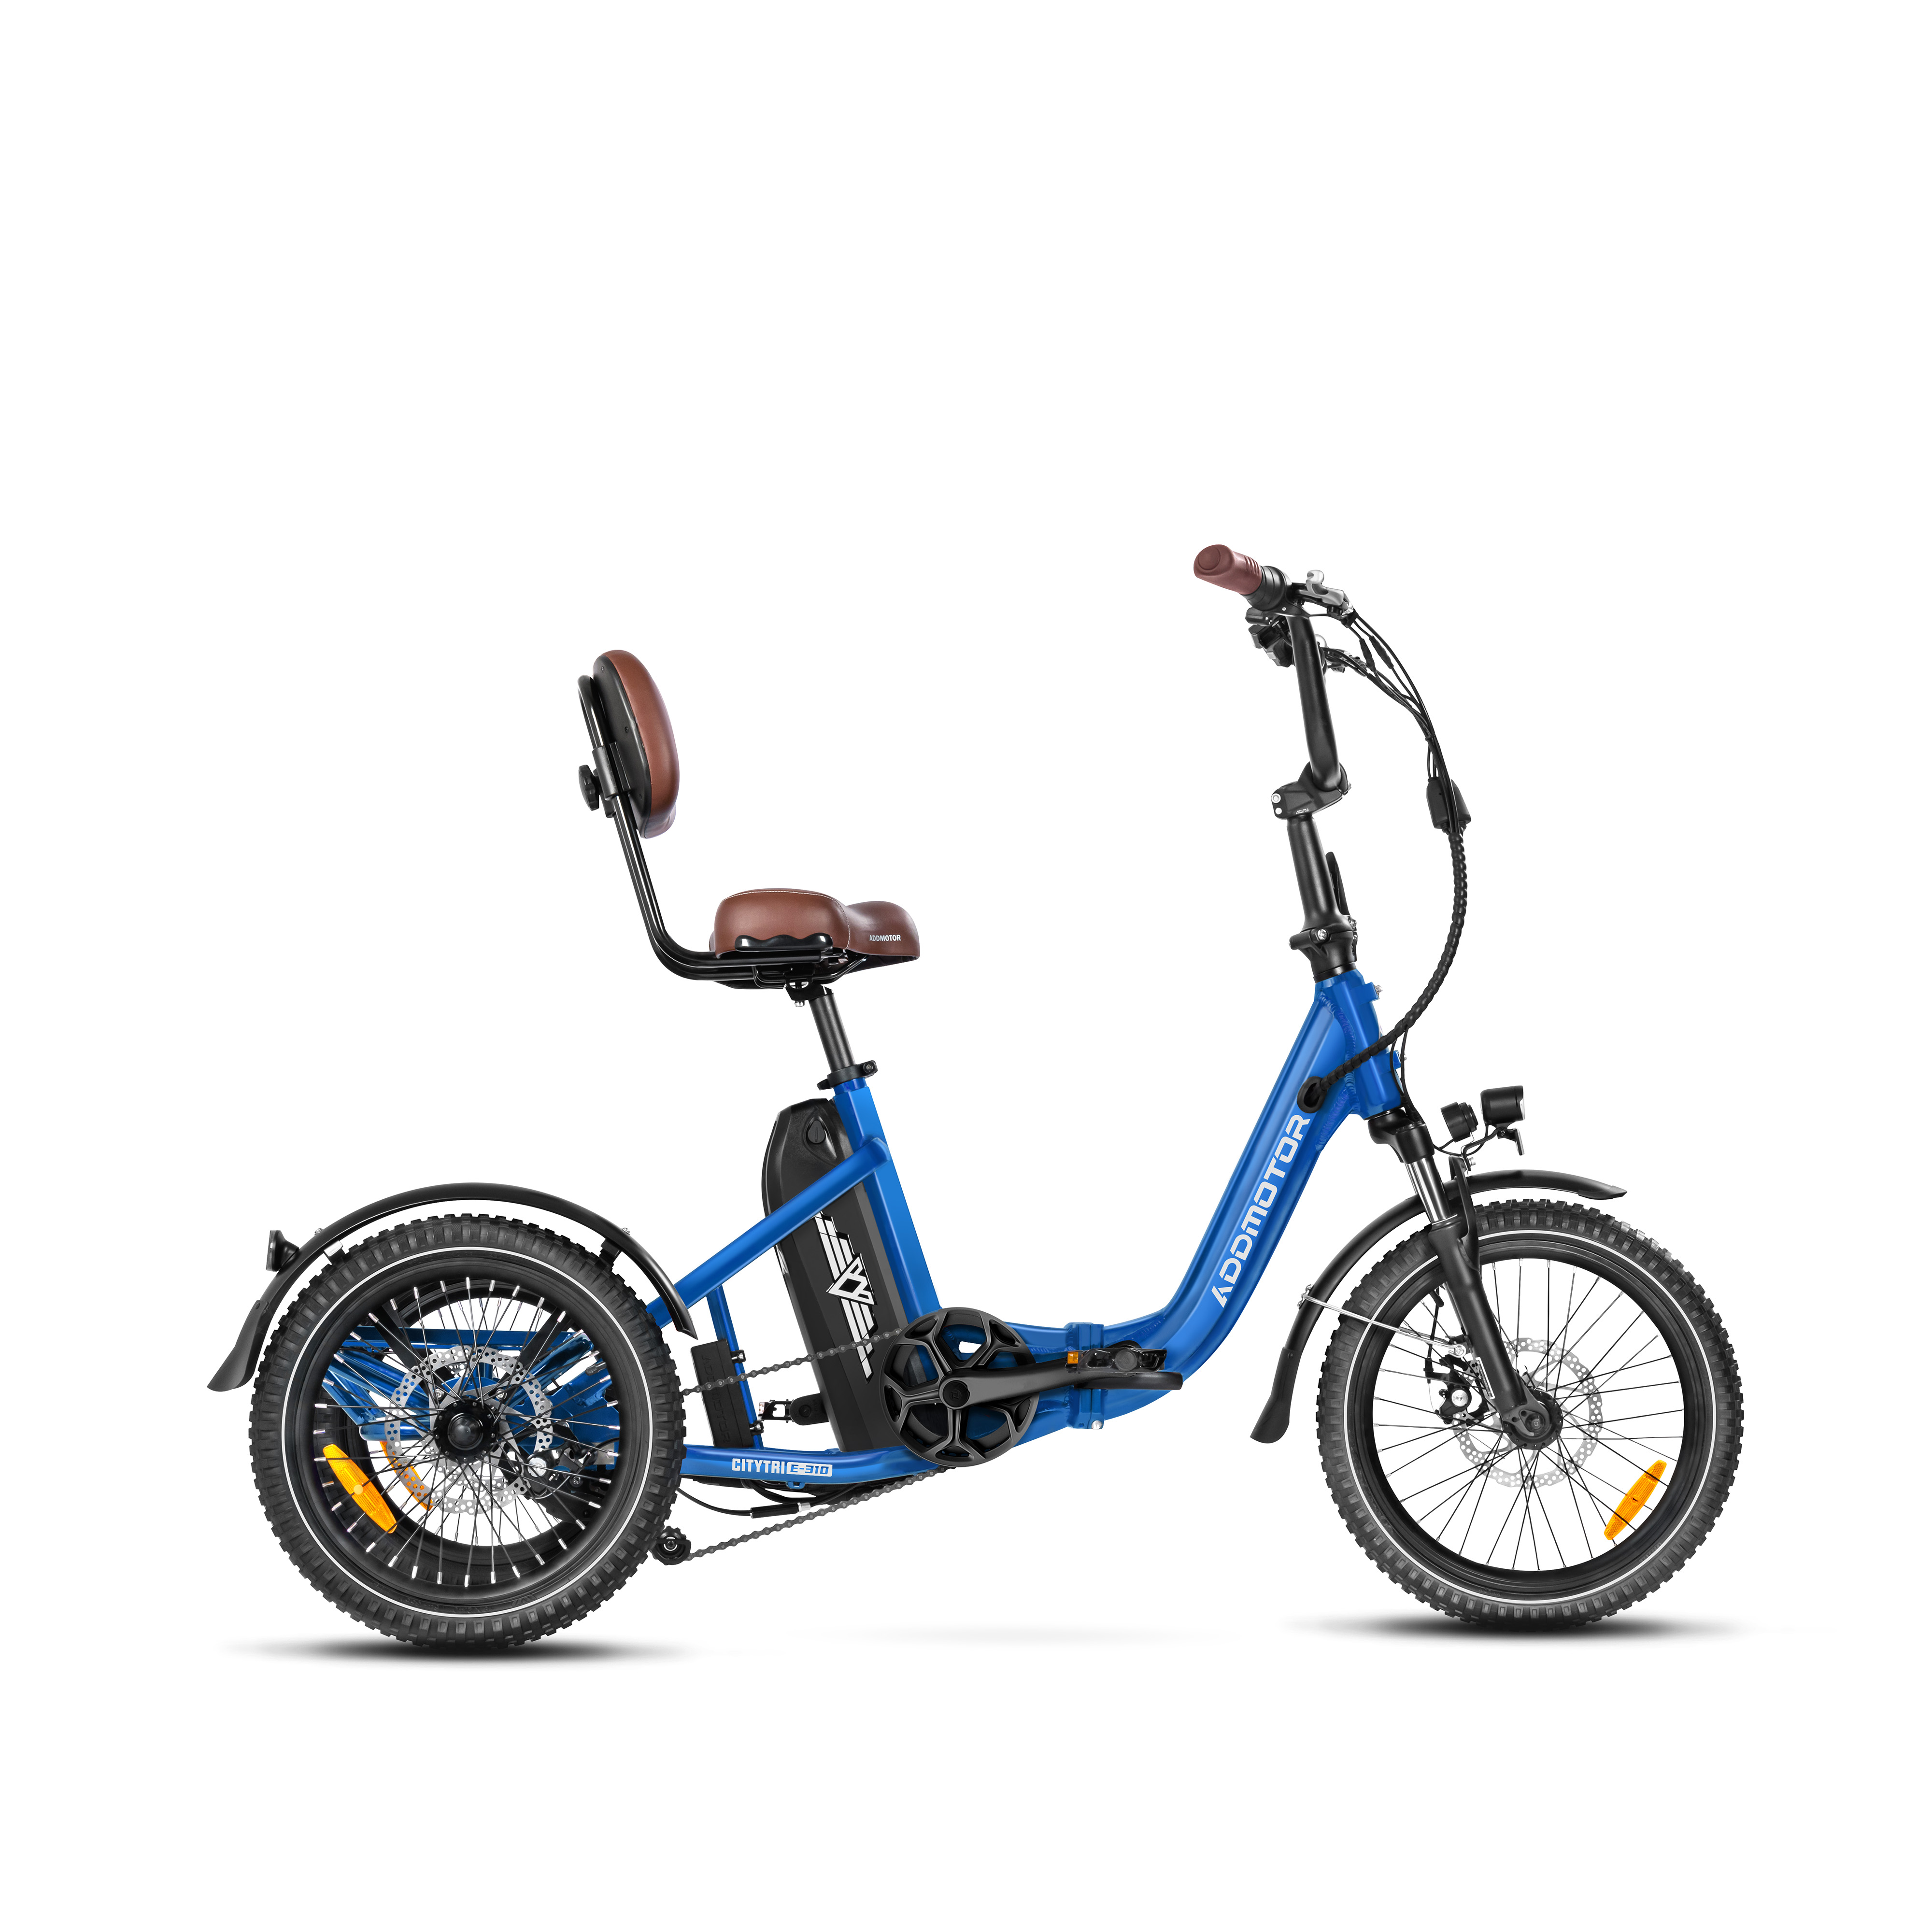 Addmotor Citytri E-310 Mini 750W Electric Trike for Adults Best Electric Tricycle Under $2000 Up To 90 Miles - Neptune Blue